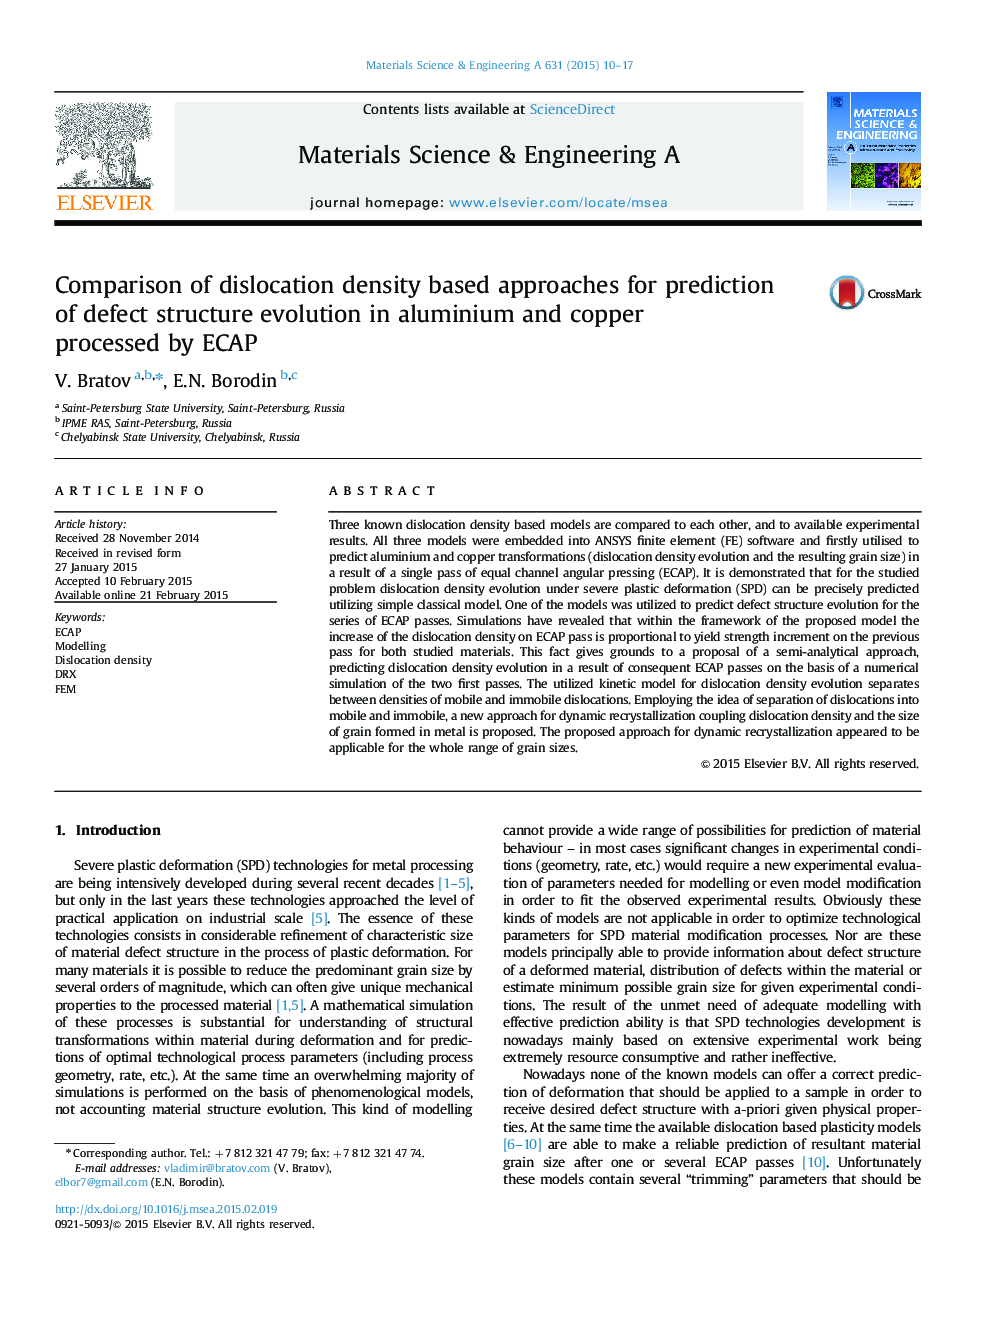 Comparison of dislocation density based approaches for prediction of defect structure evolution in aluminium and copper processed by ECAP